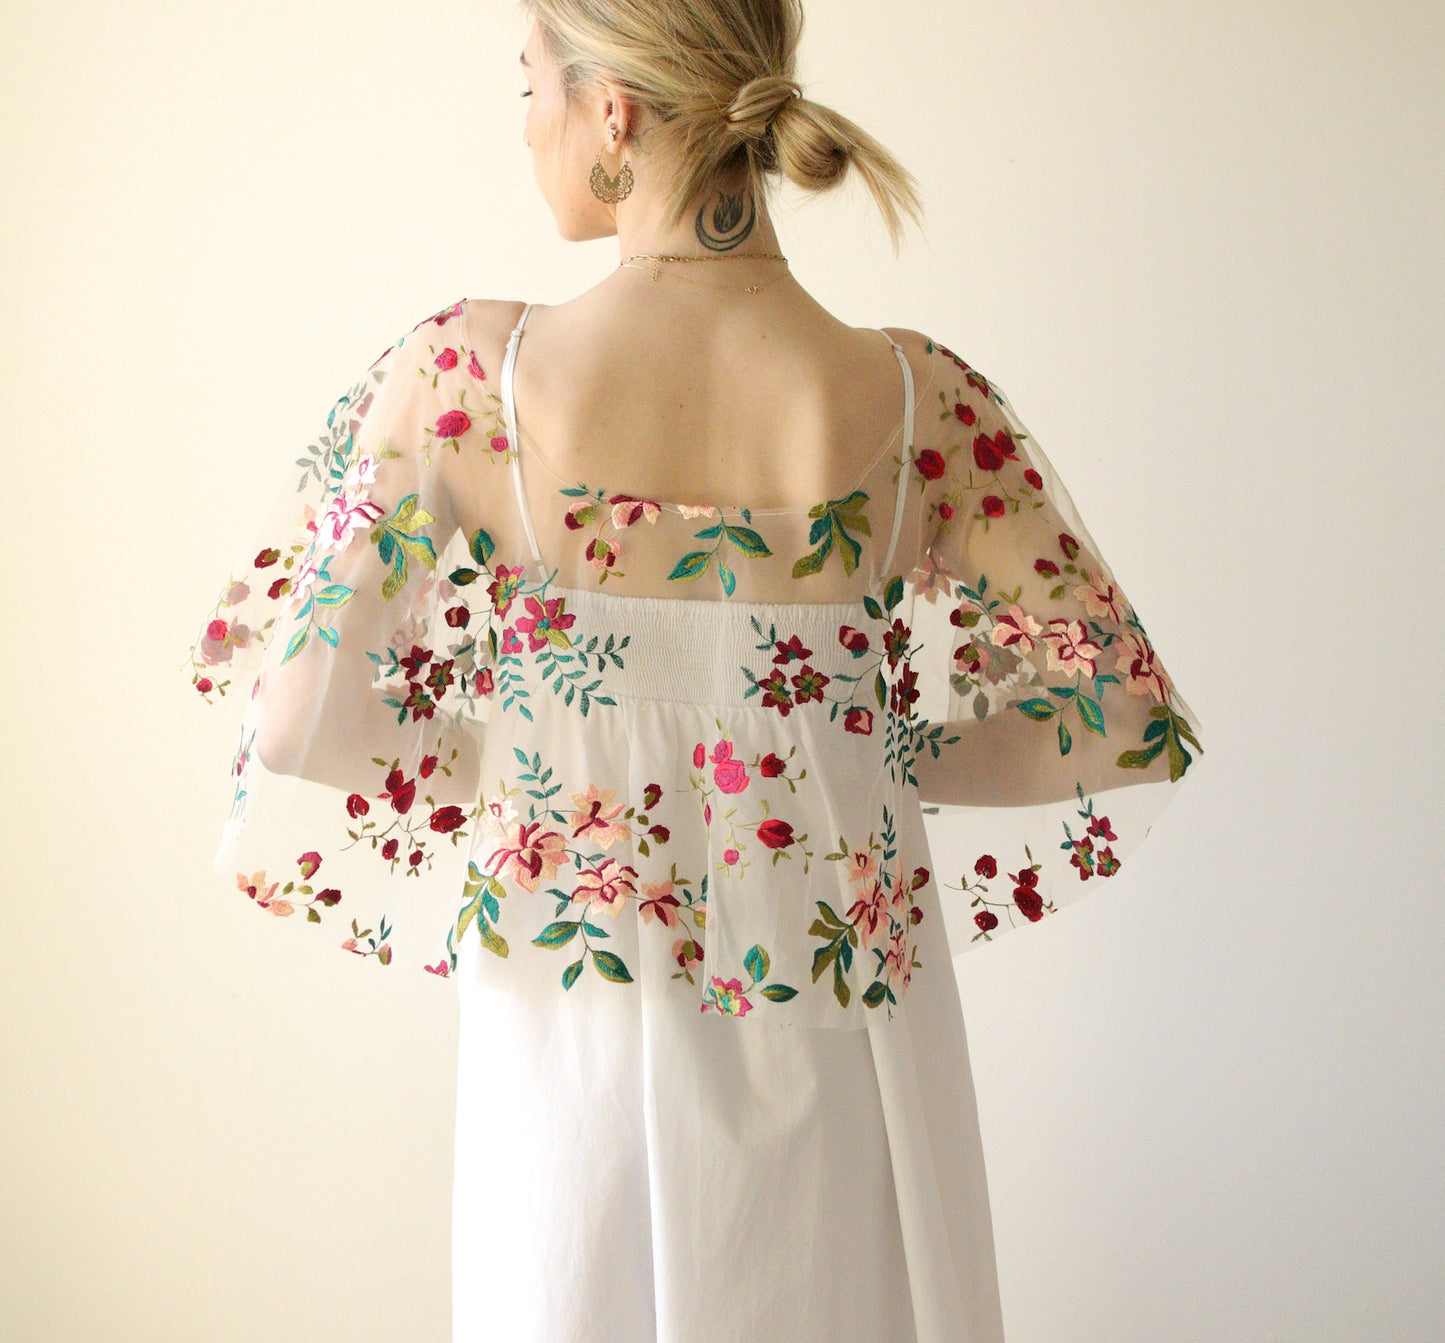 Garden party embroidered floral bridal capelet